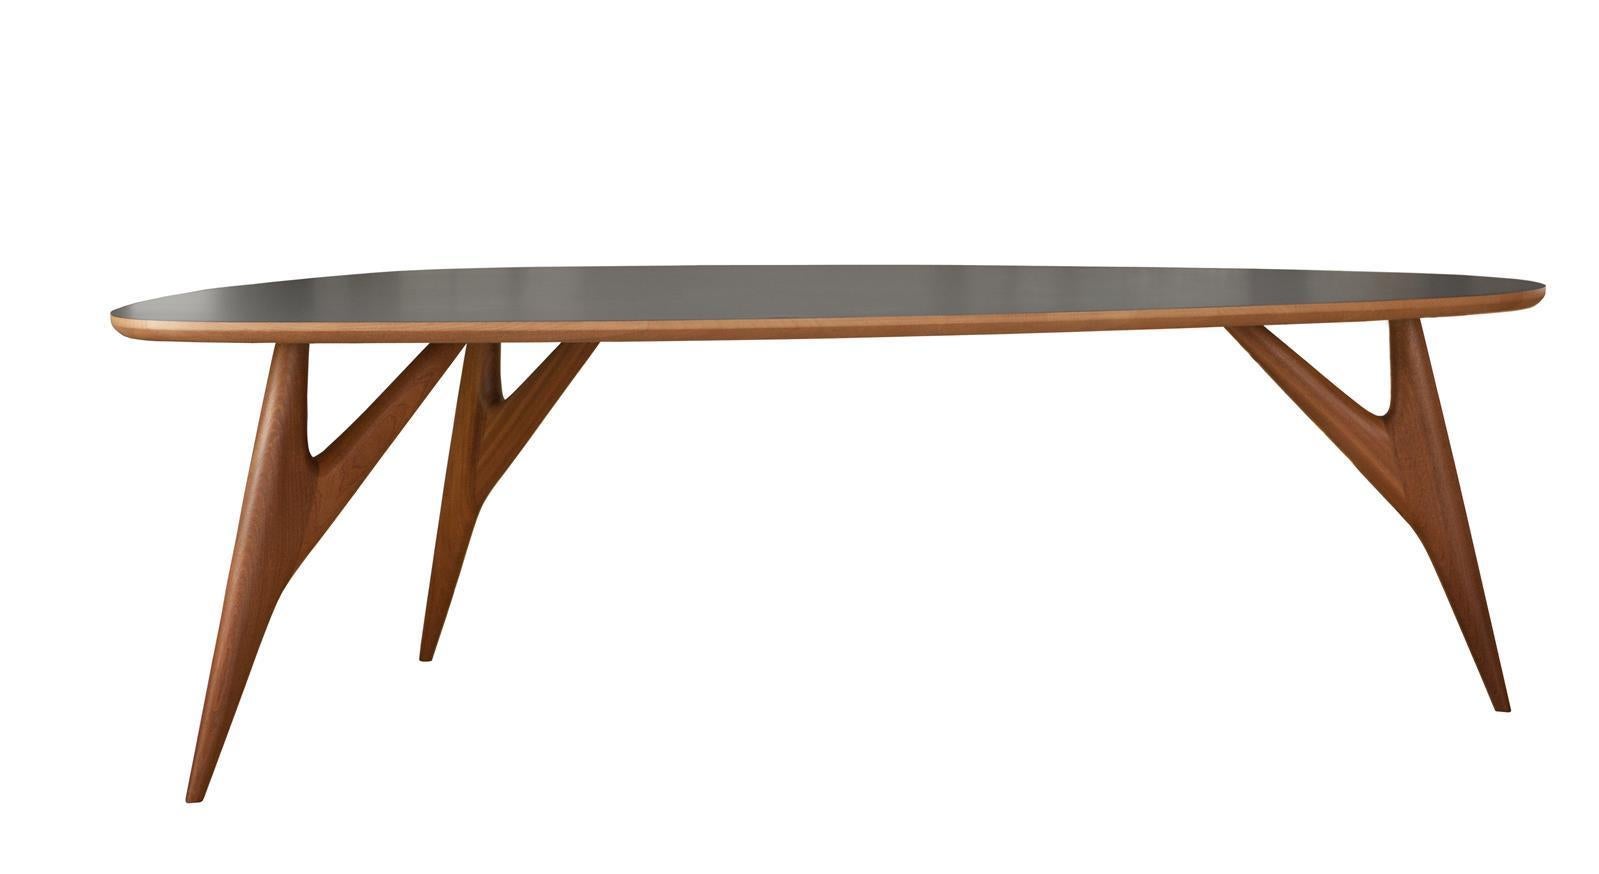 This remarkable wooden dining table is distinguished by an aerodynamic silhouette capable of infusing character into any modern dining area. The sail-shaped, gray-lacquered top rests on three tapered legs displaying a stylized branched design that